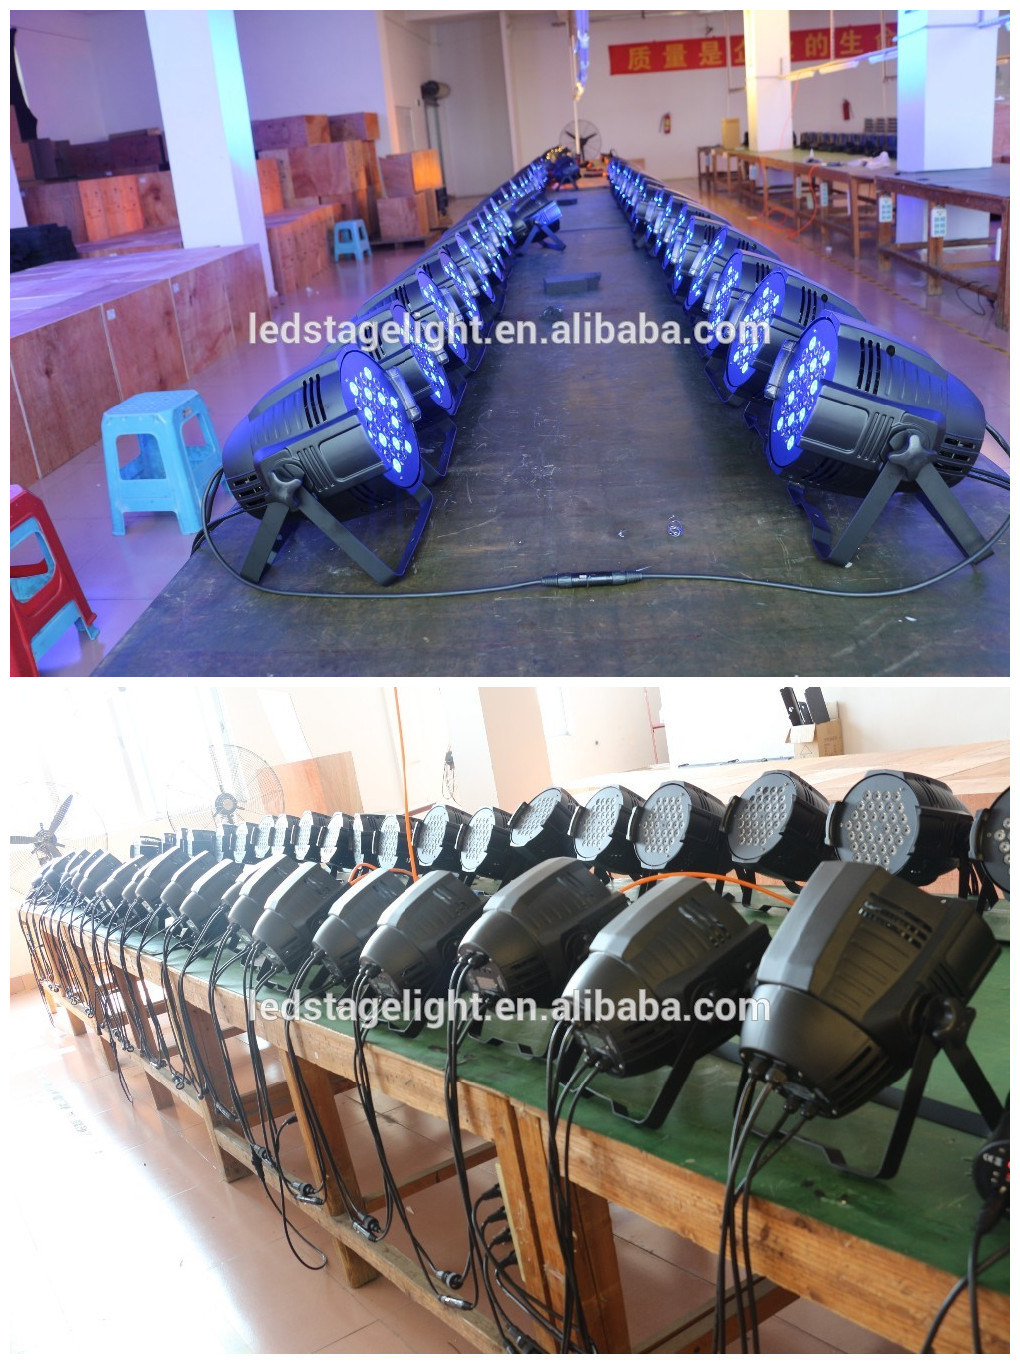 Gbr Stage Lighting Equipment Guangzhou Stage Light 54PCS LED RGBW LED PAR 54*3W for Professional